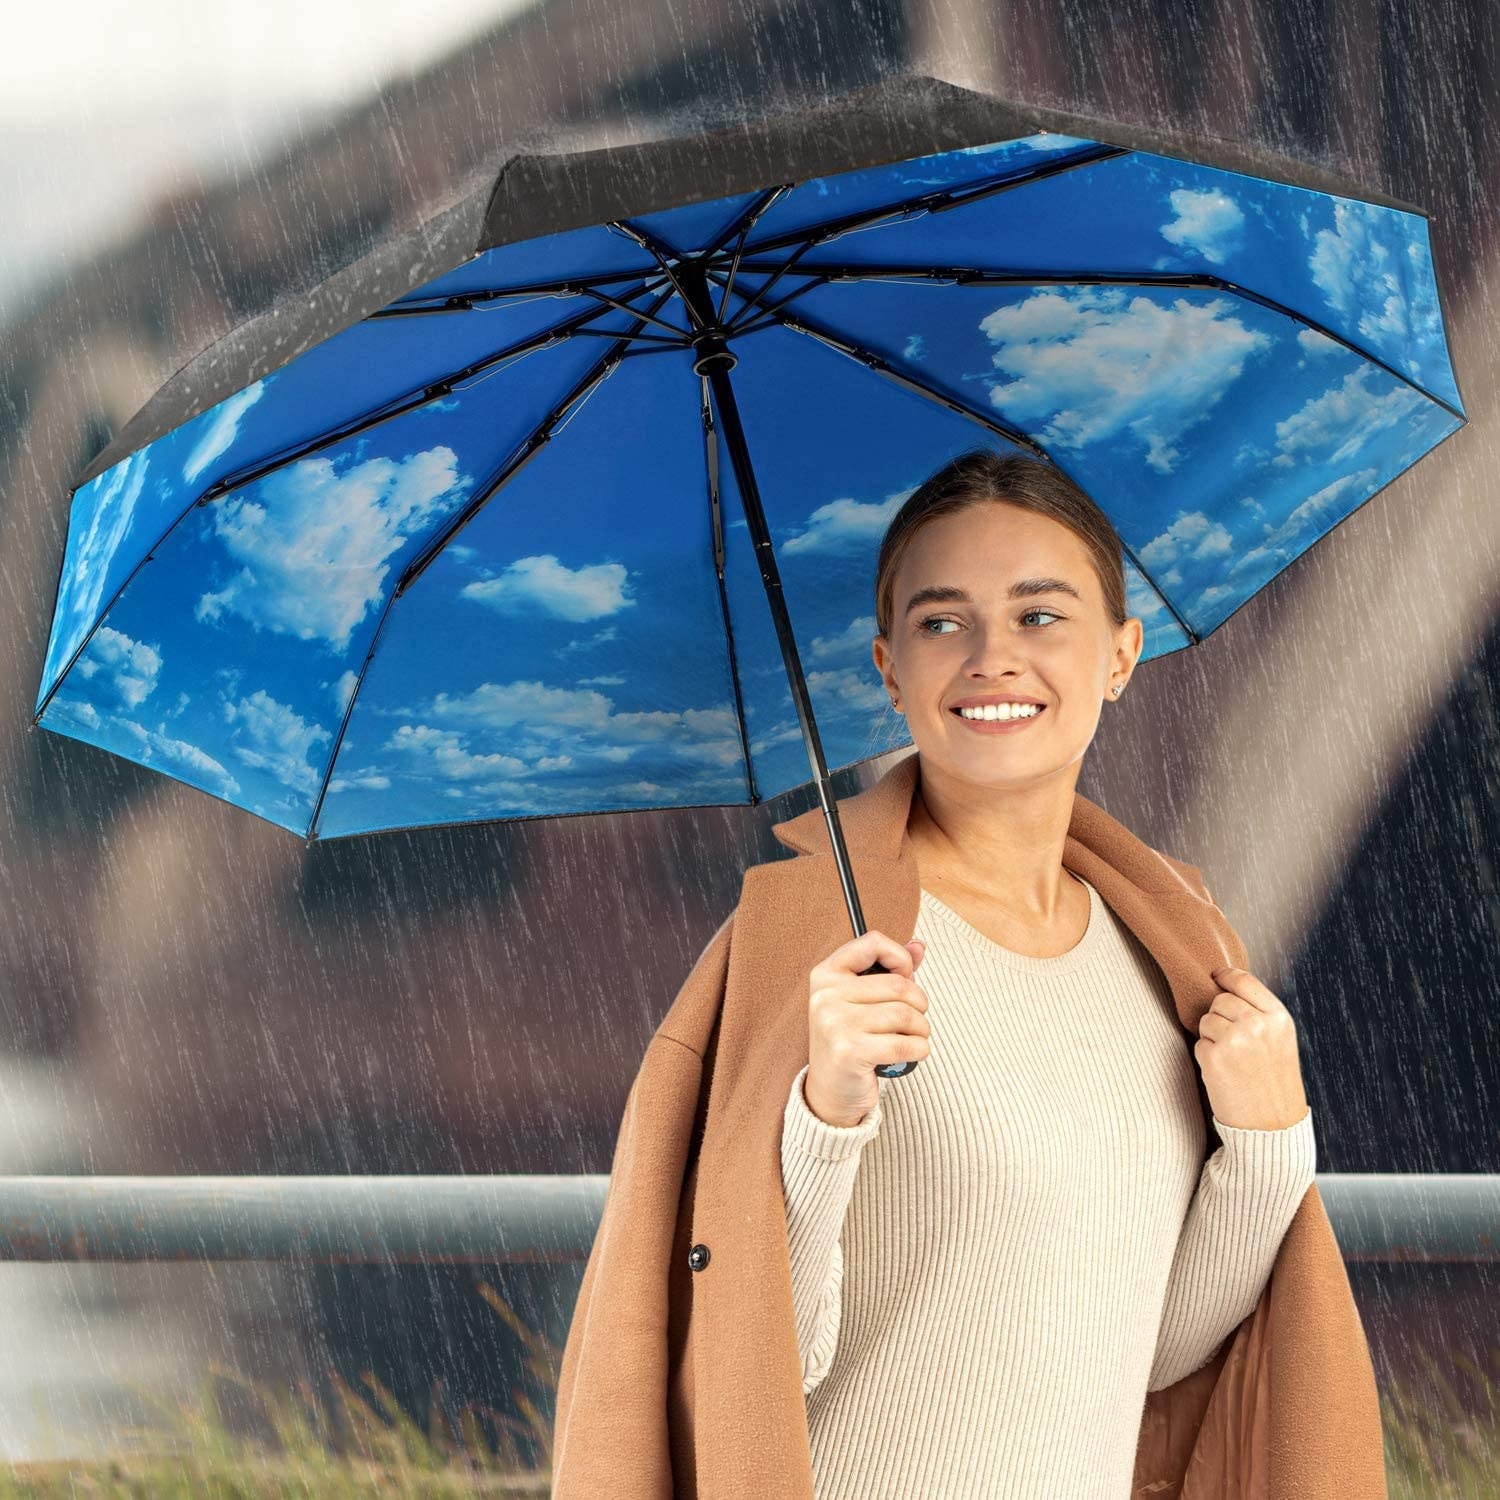 Model holding a black umbrella with a cloudy blue sky pattern on the inside